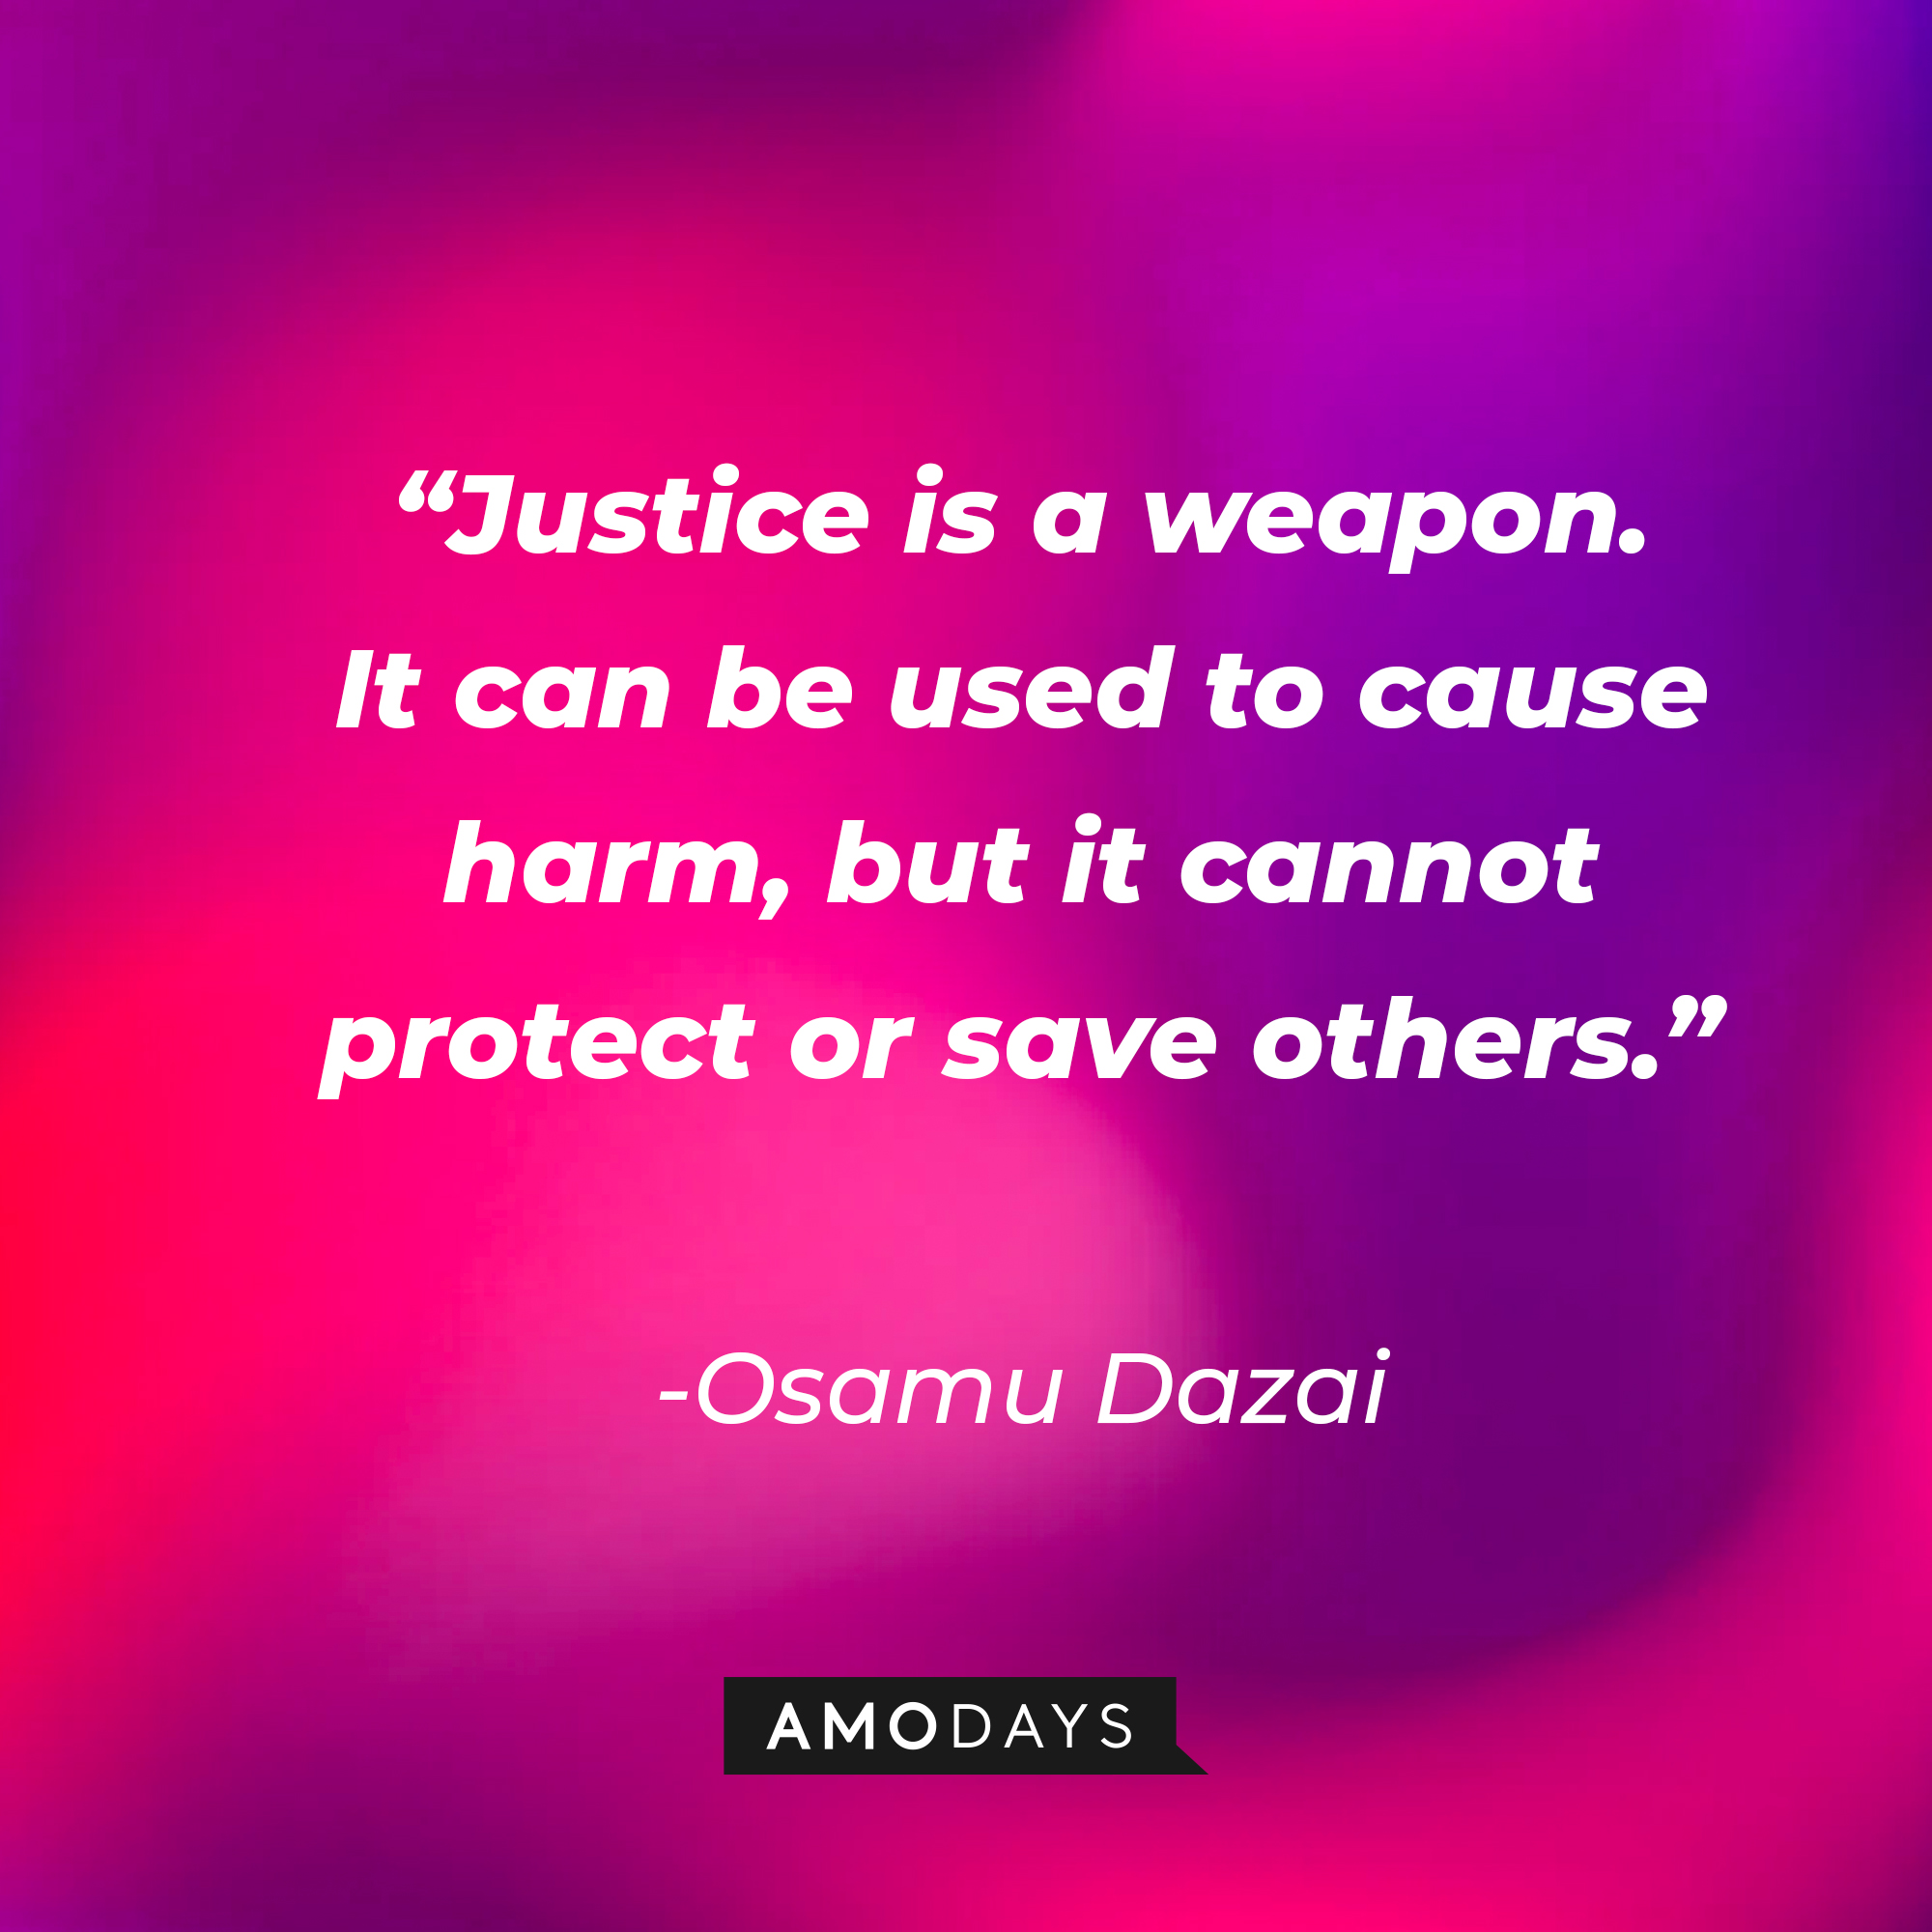 Osamu Dazai’s quote: “Justice is a weapon. It can be used to cause harm, but it cannot protect or save others.” | Source: AmoDays s